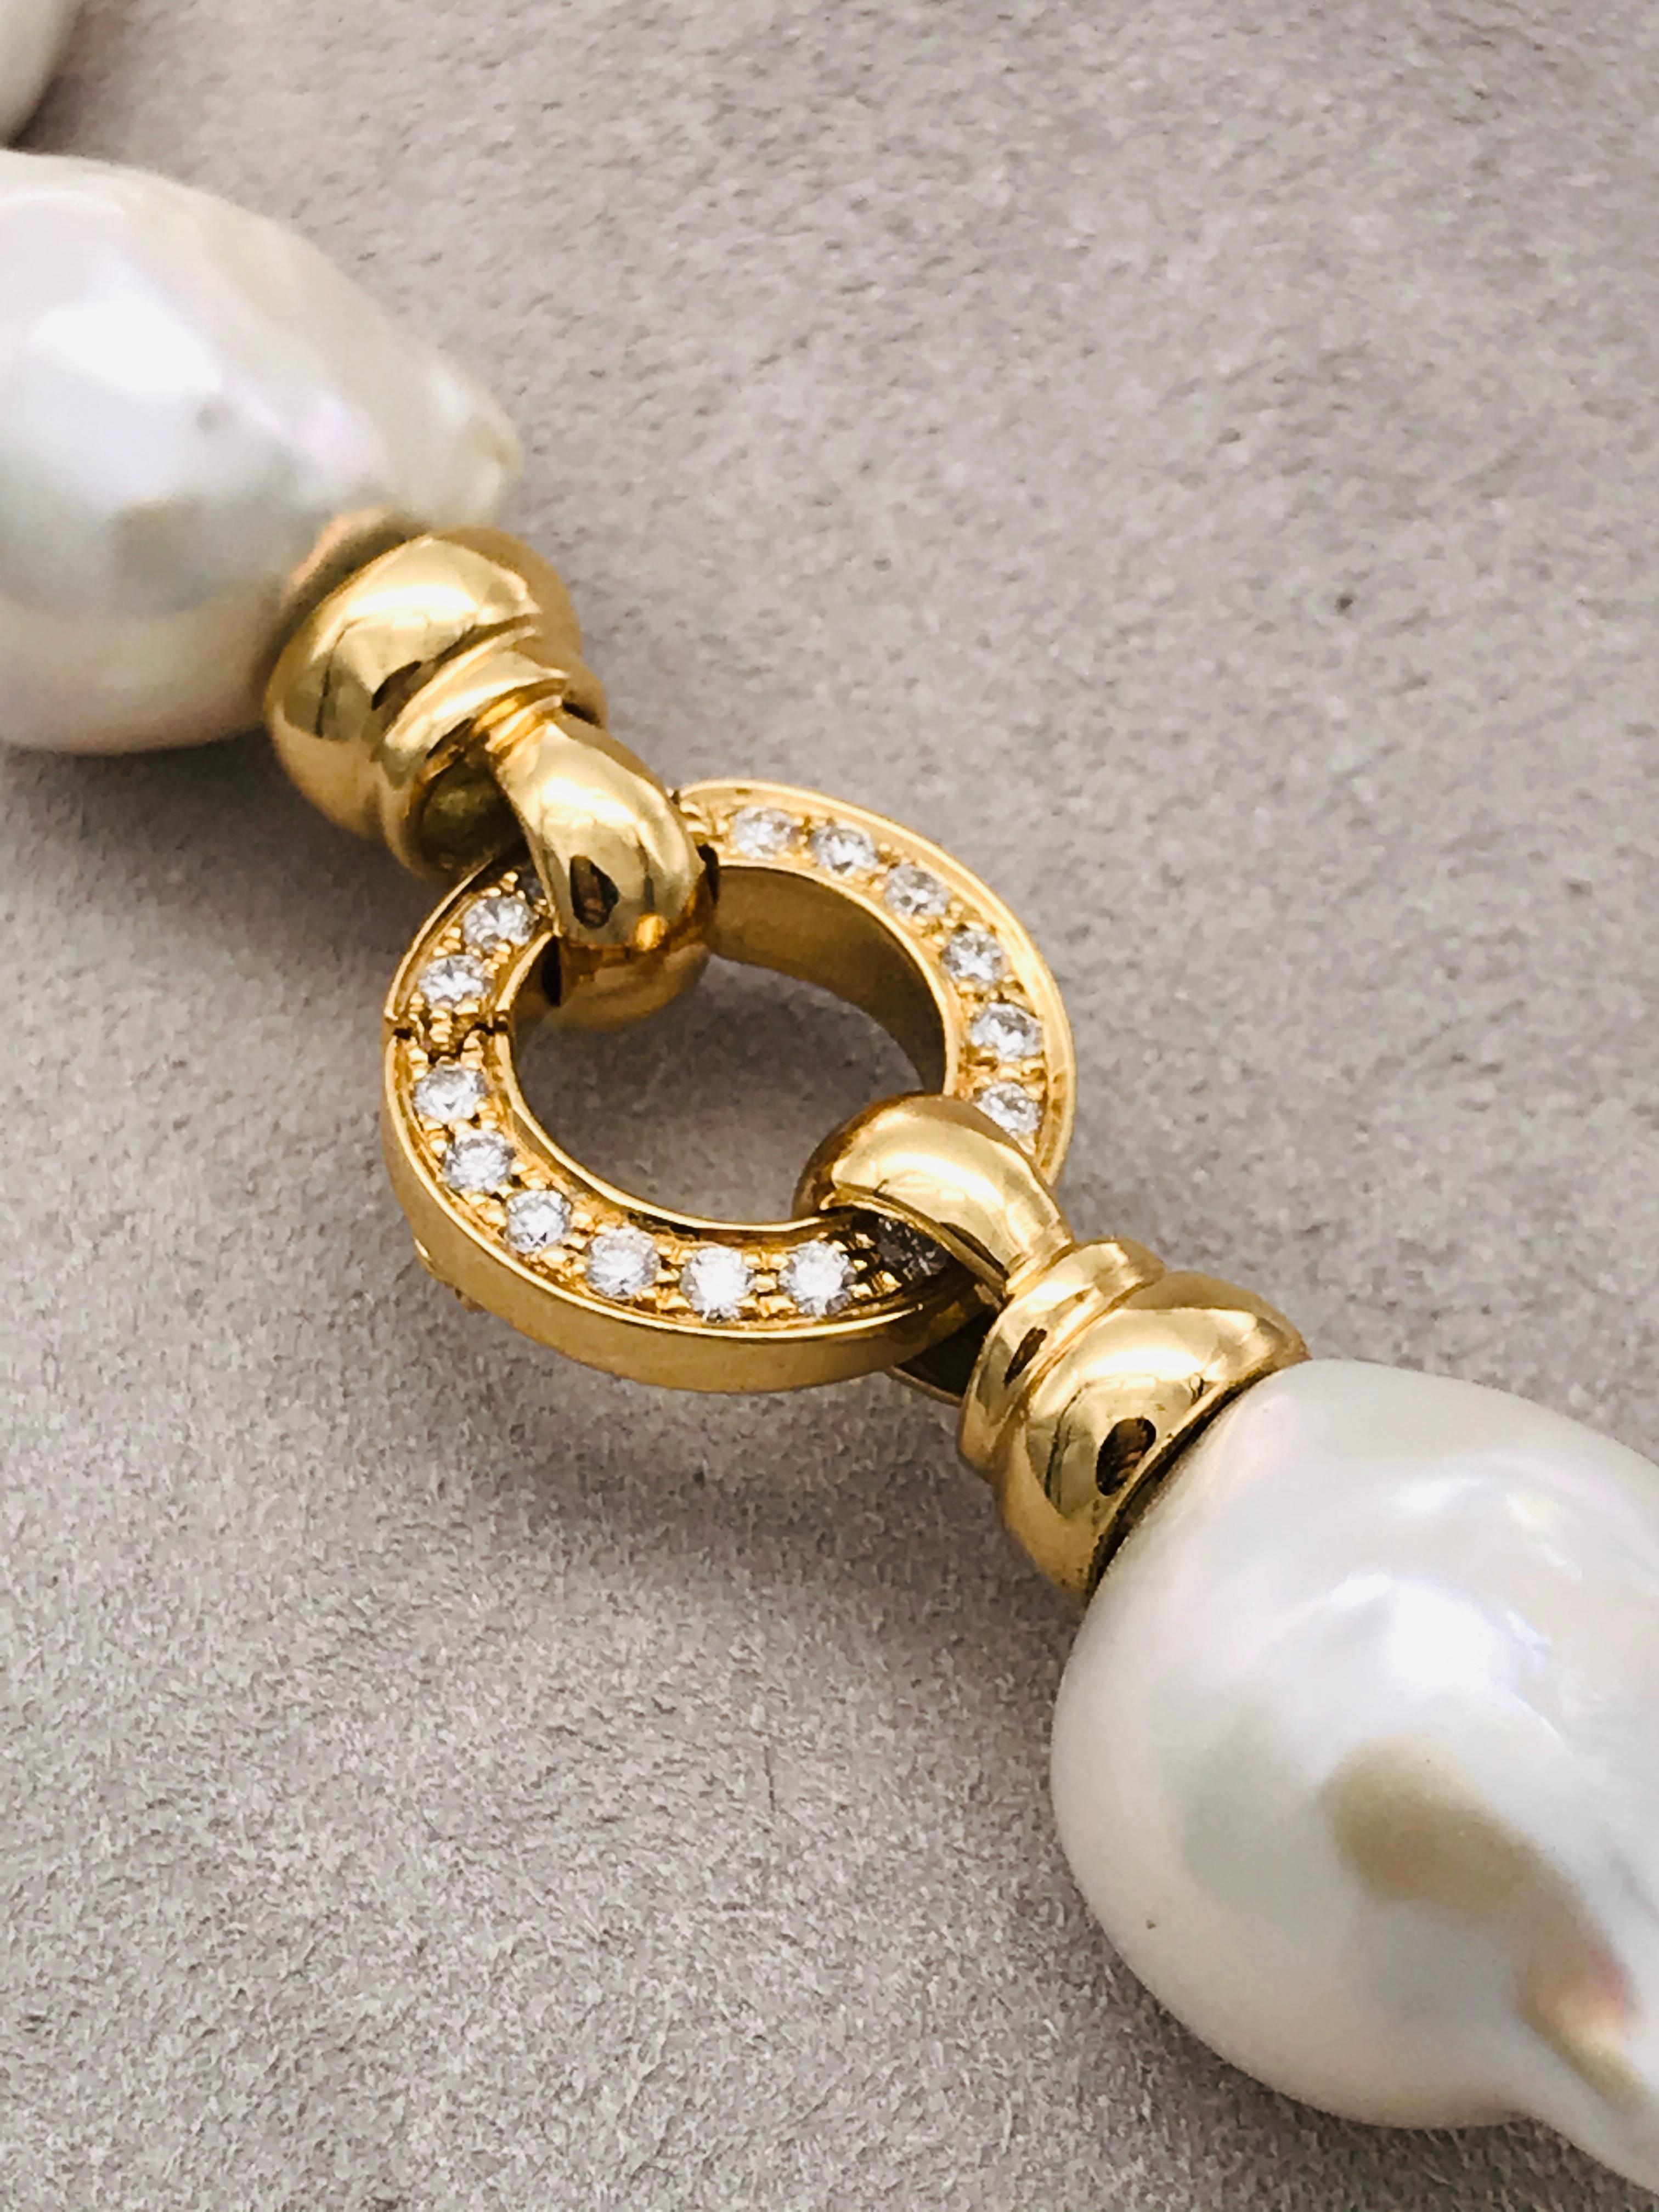 Baroques Pearls Necklaces with Gold and Diamonds Clasp 3